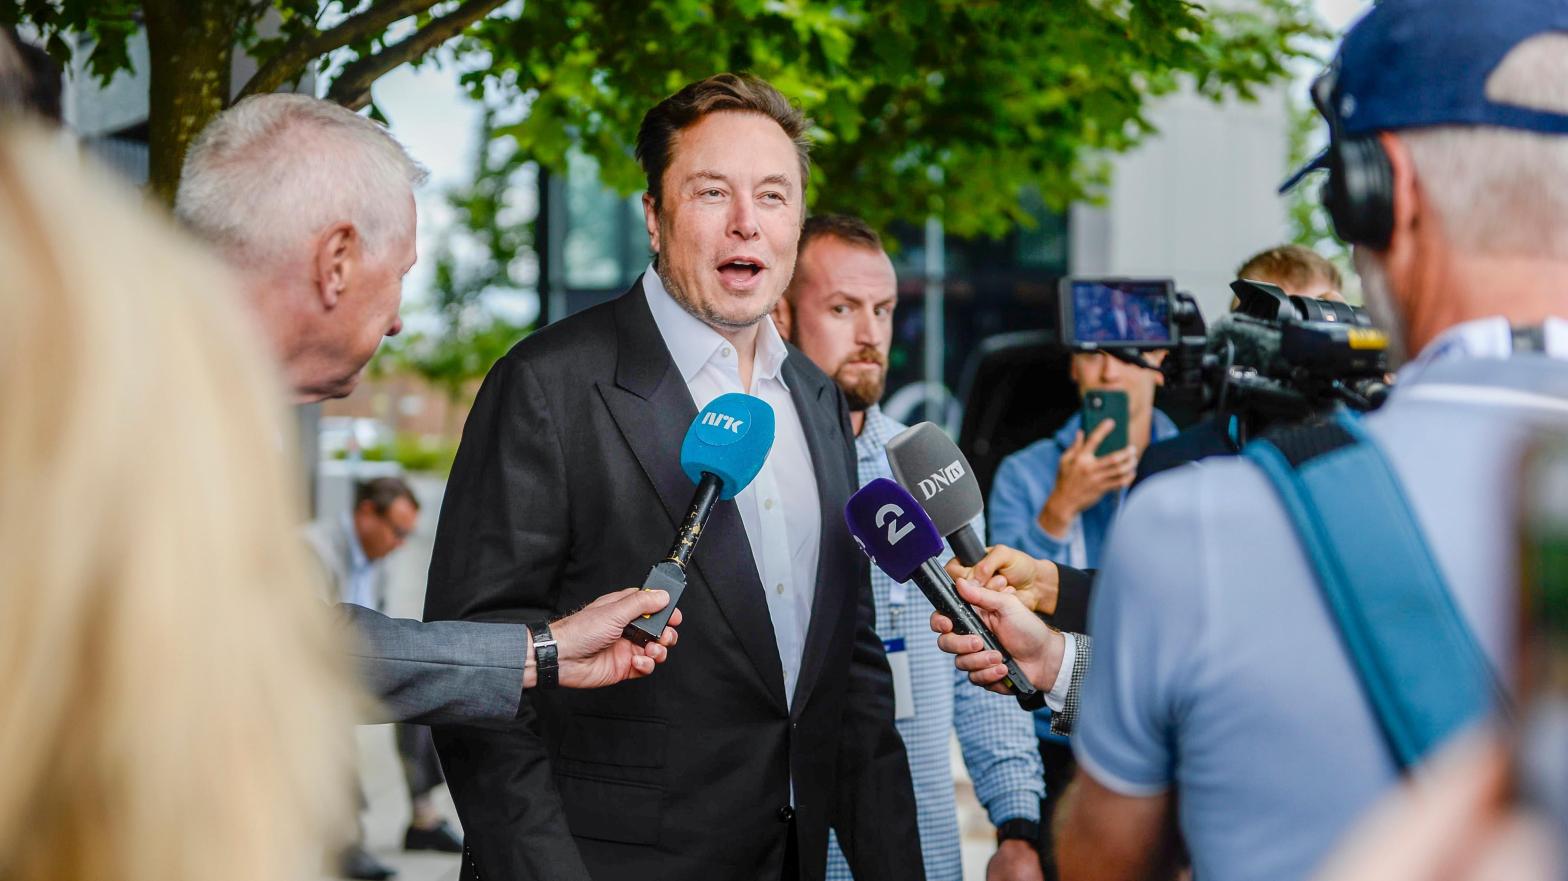 American oligarch Elon Musk at the ONS (Offshore Northern Seas) fair on sustainable energy in Stavanger, Norway on Aug. 29, 2022. (Photo: Carina Johansen/NTB Scanpix, AP)